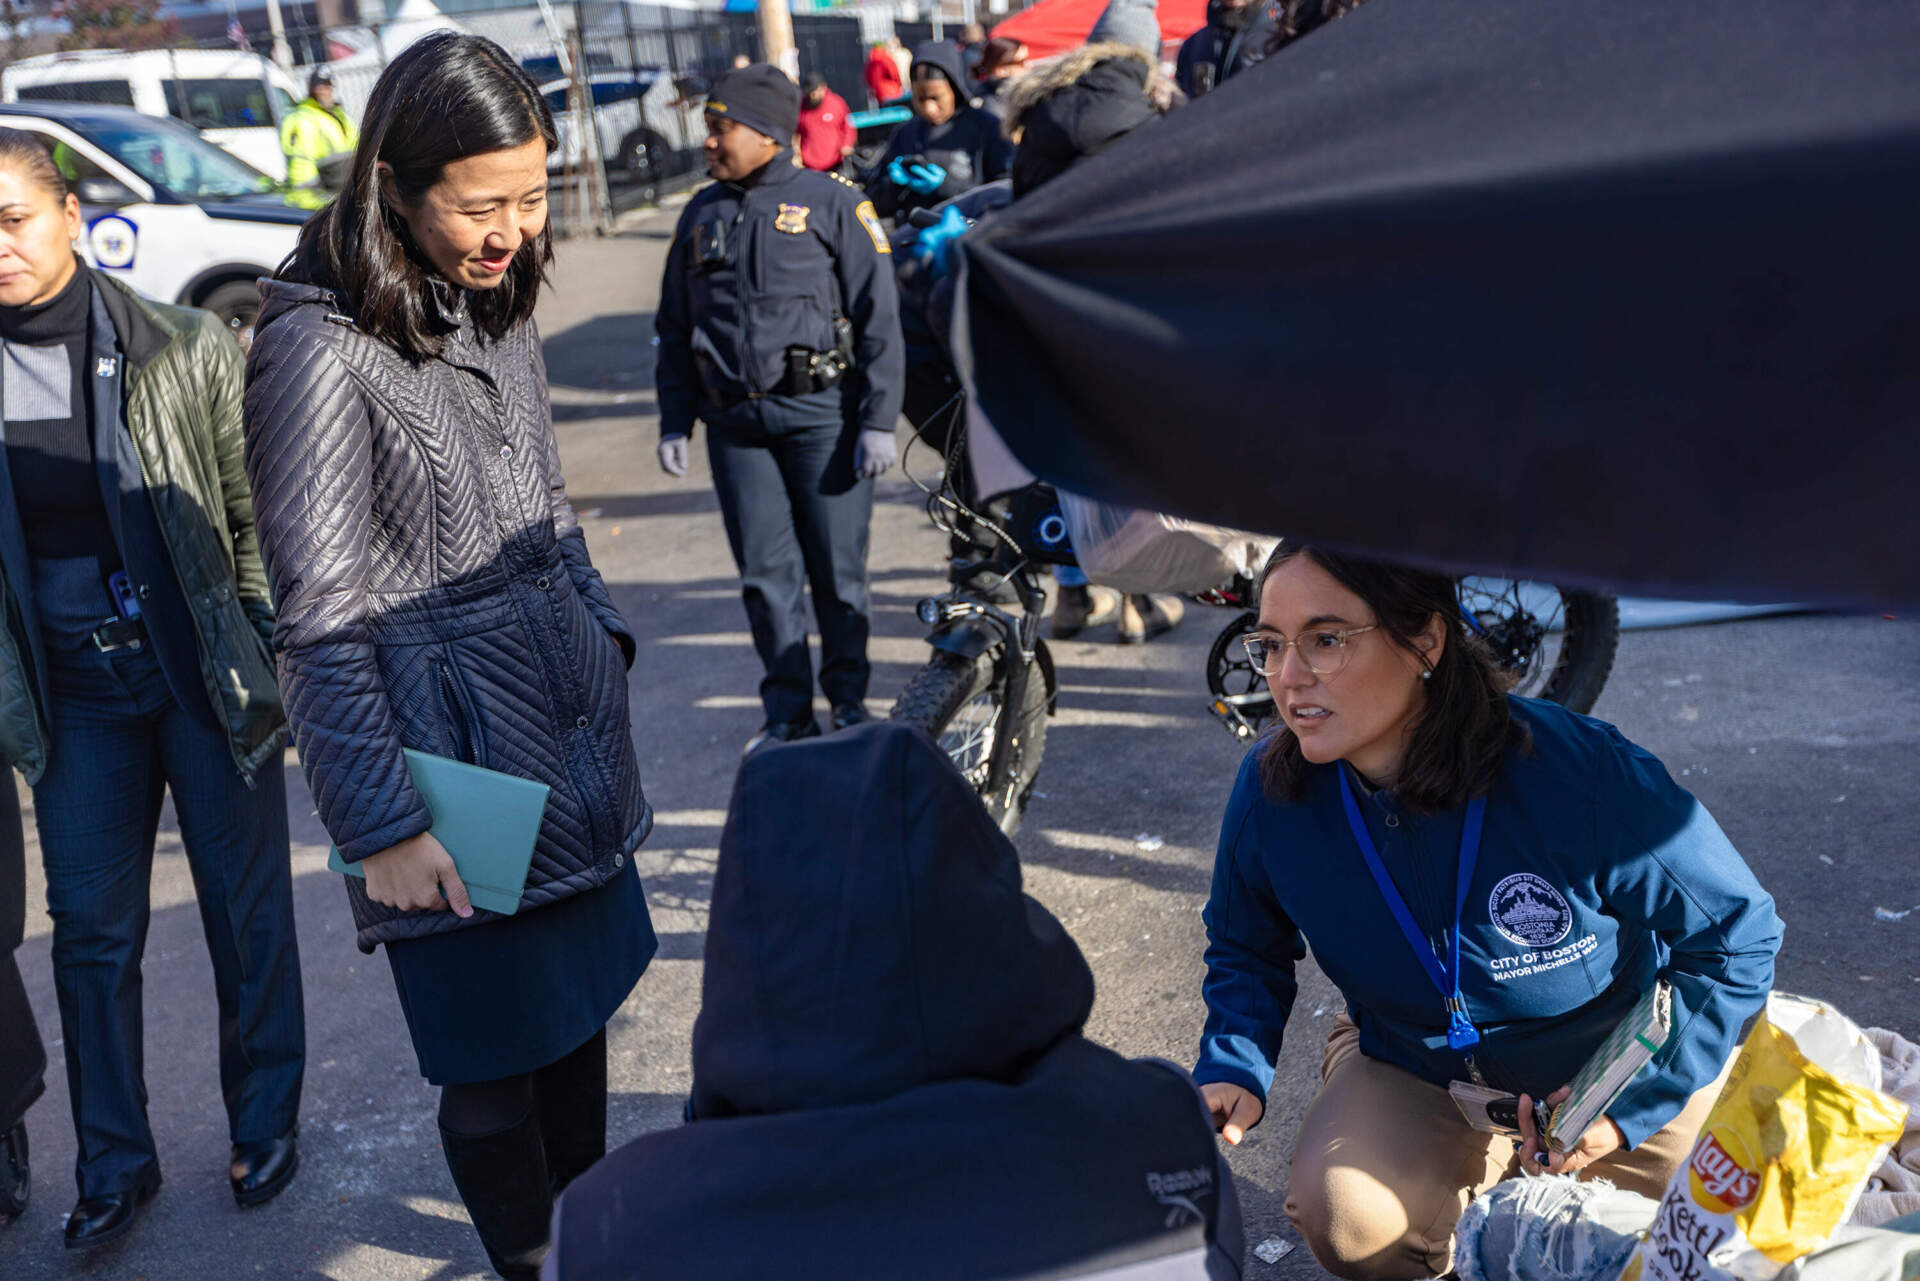 Mayor Michelle Wu and Senior Advisor to the Mayor Tania Del Rio speak with a person who was living in the tent encampment on Atkinson Street. (Jesse Costa/WBUR)